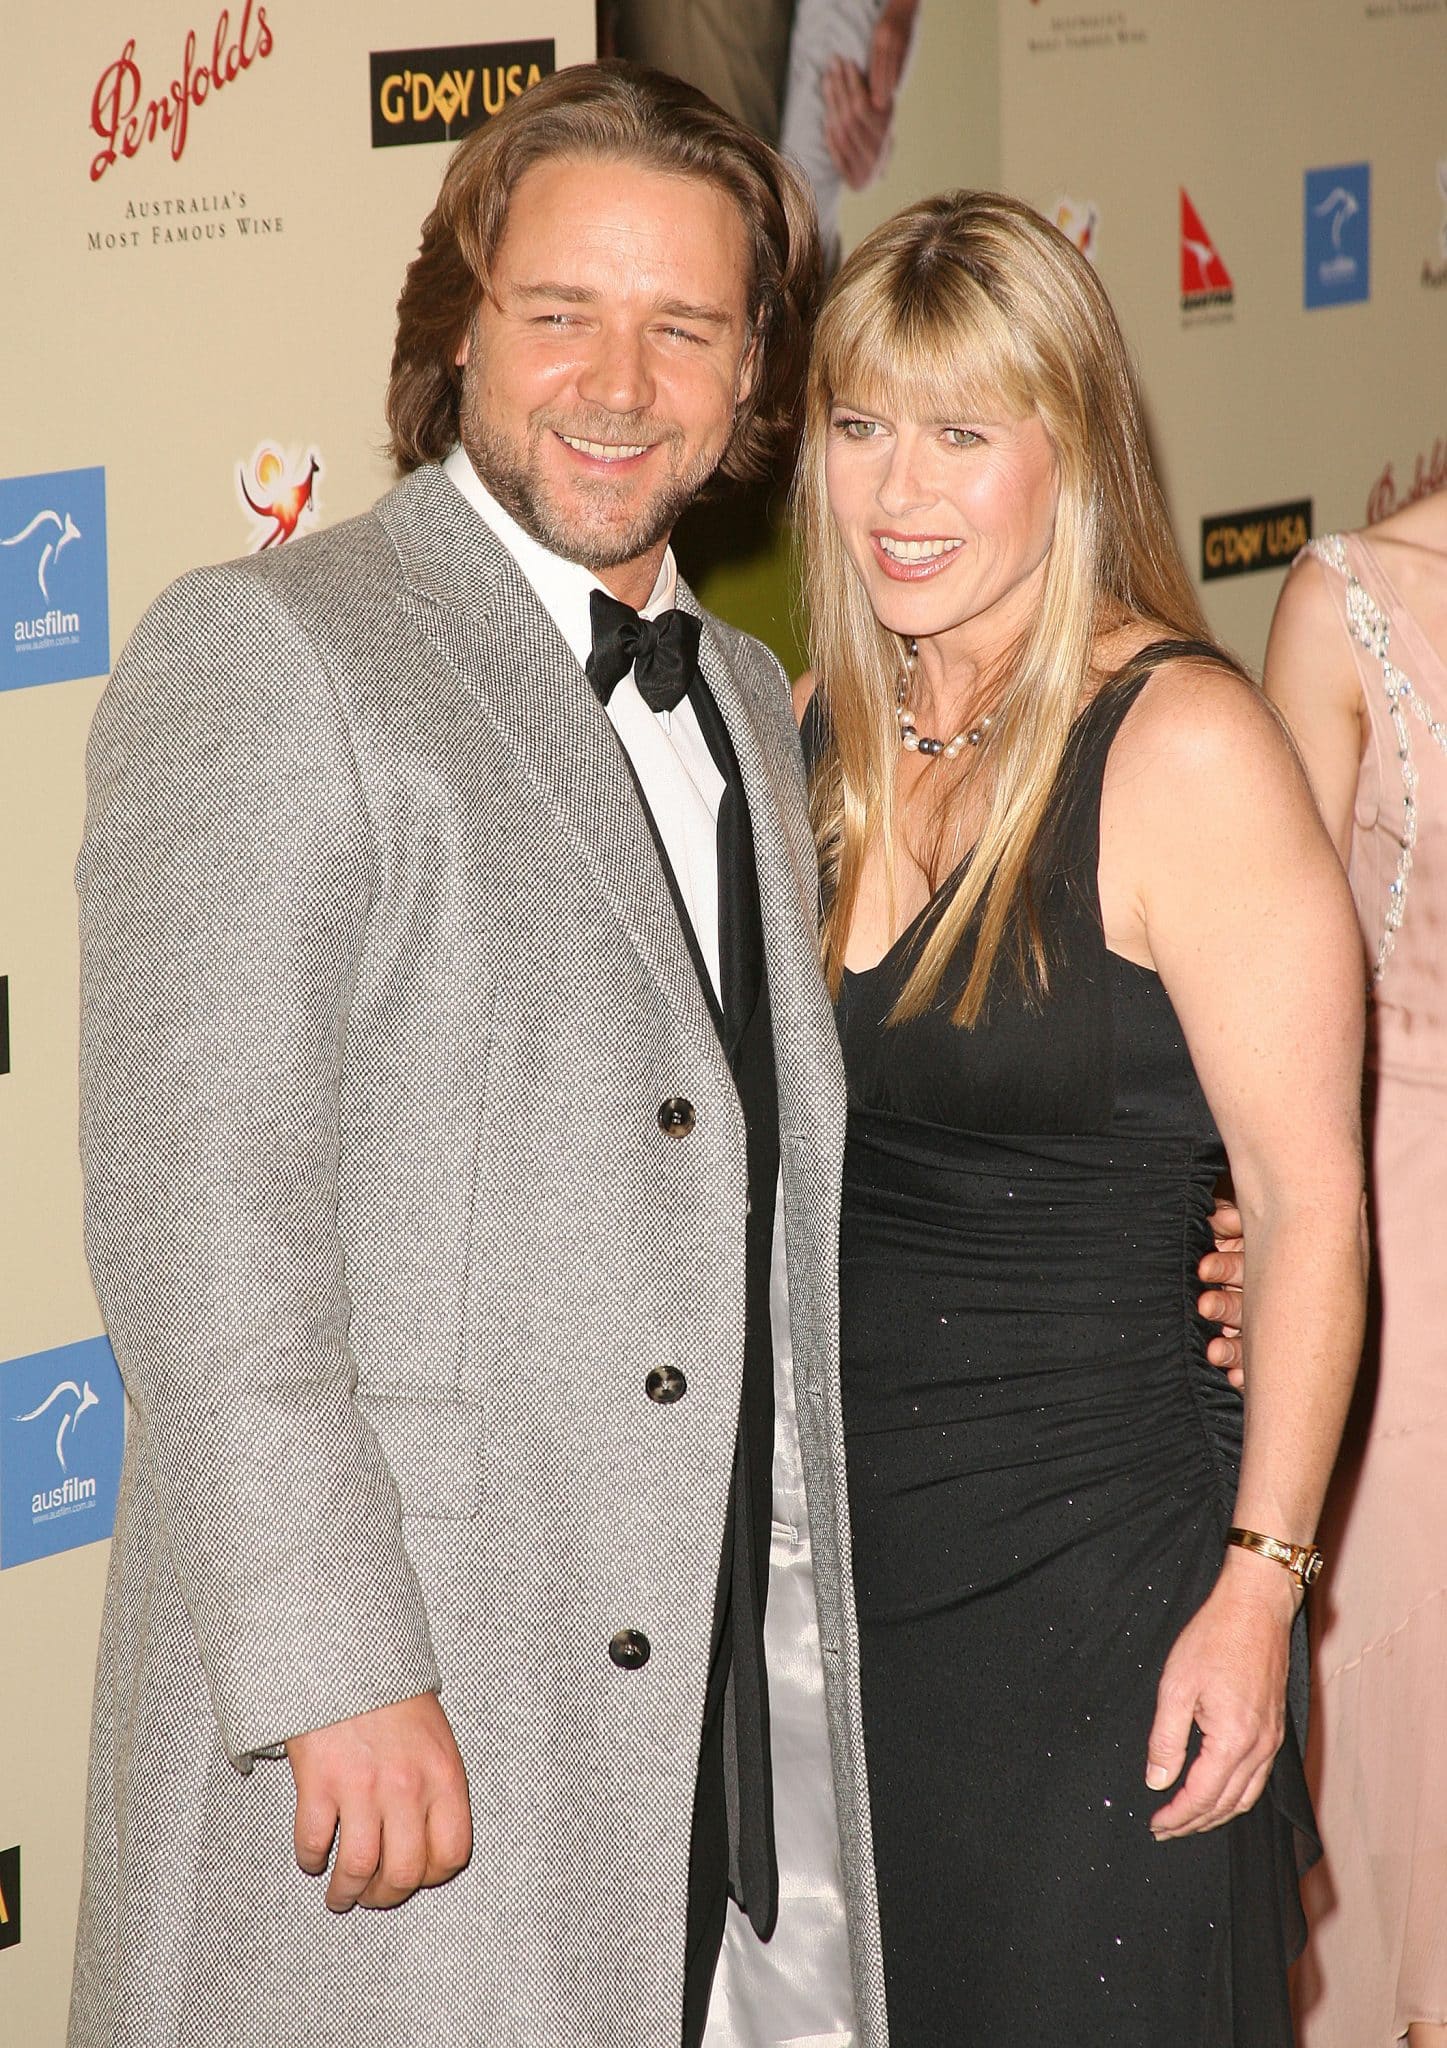 Terri Irwin attends an event with Russell Crowe in 2007.